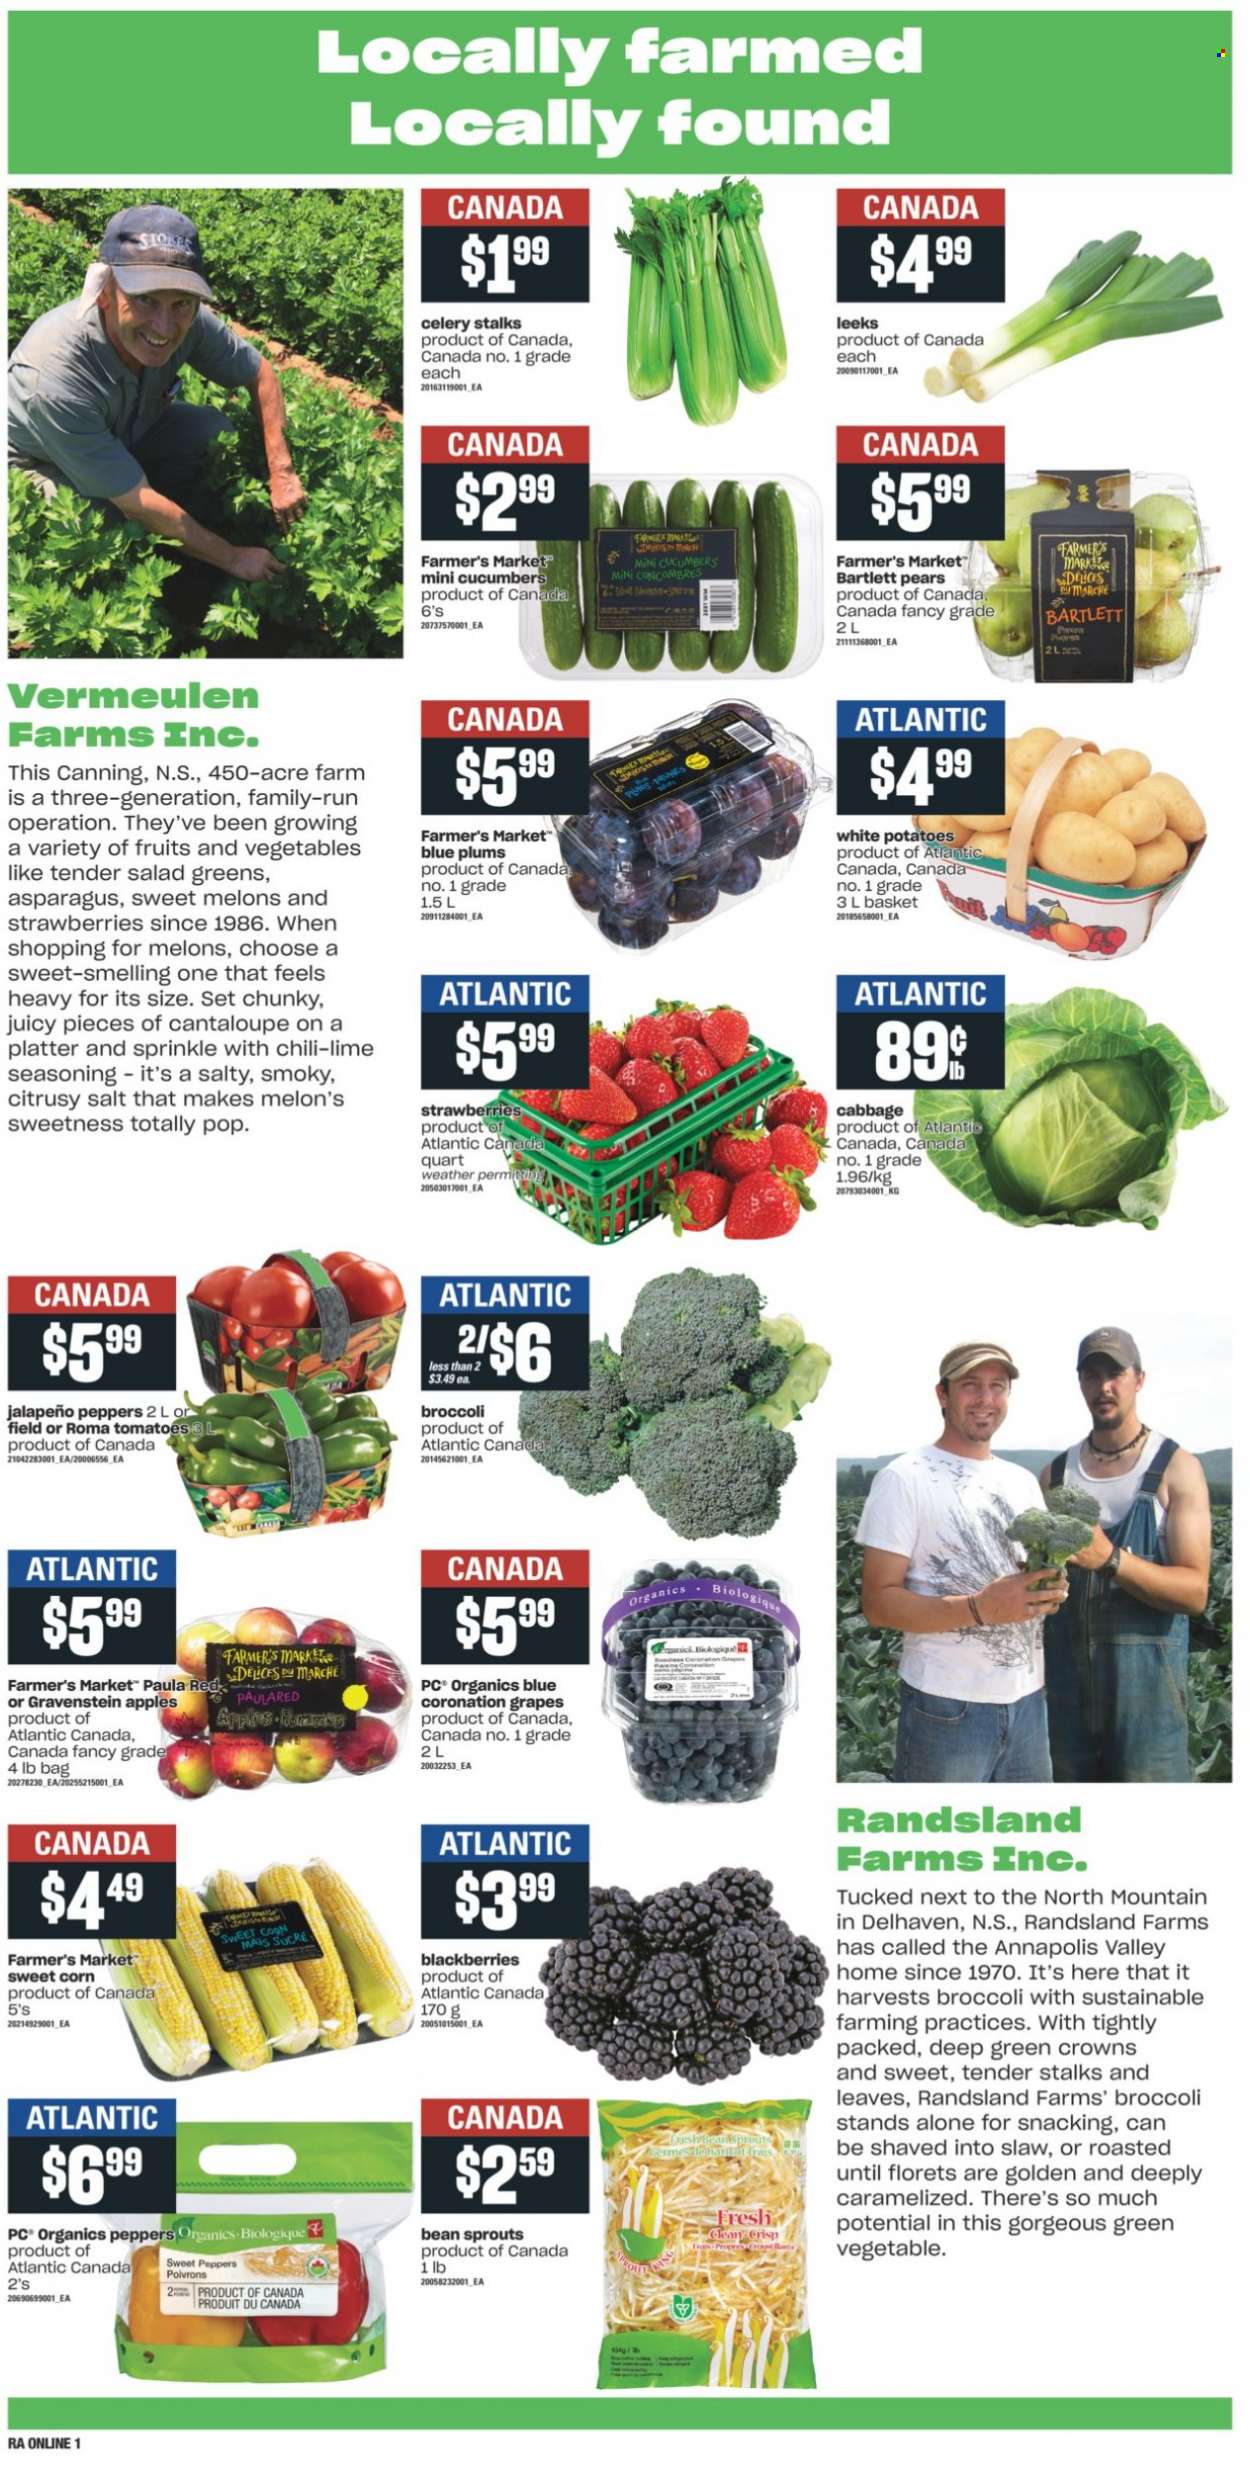 thumbnail - Atlantic Superstore Flyer - September 09, 2021 - September 15, 2021 - Sales products - asparagus, broccoli, cabbage, cantaloupe, celery, corn, cucumber, sweet peppers, tomatoes, potatoes, salad, jalapeño, sweet corn, sleeved celery, apples, Bartlett pears, blackberries, grapes, strawberries, plums, pears, melons, spice, bean sprouts, salad greens. Page 4.